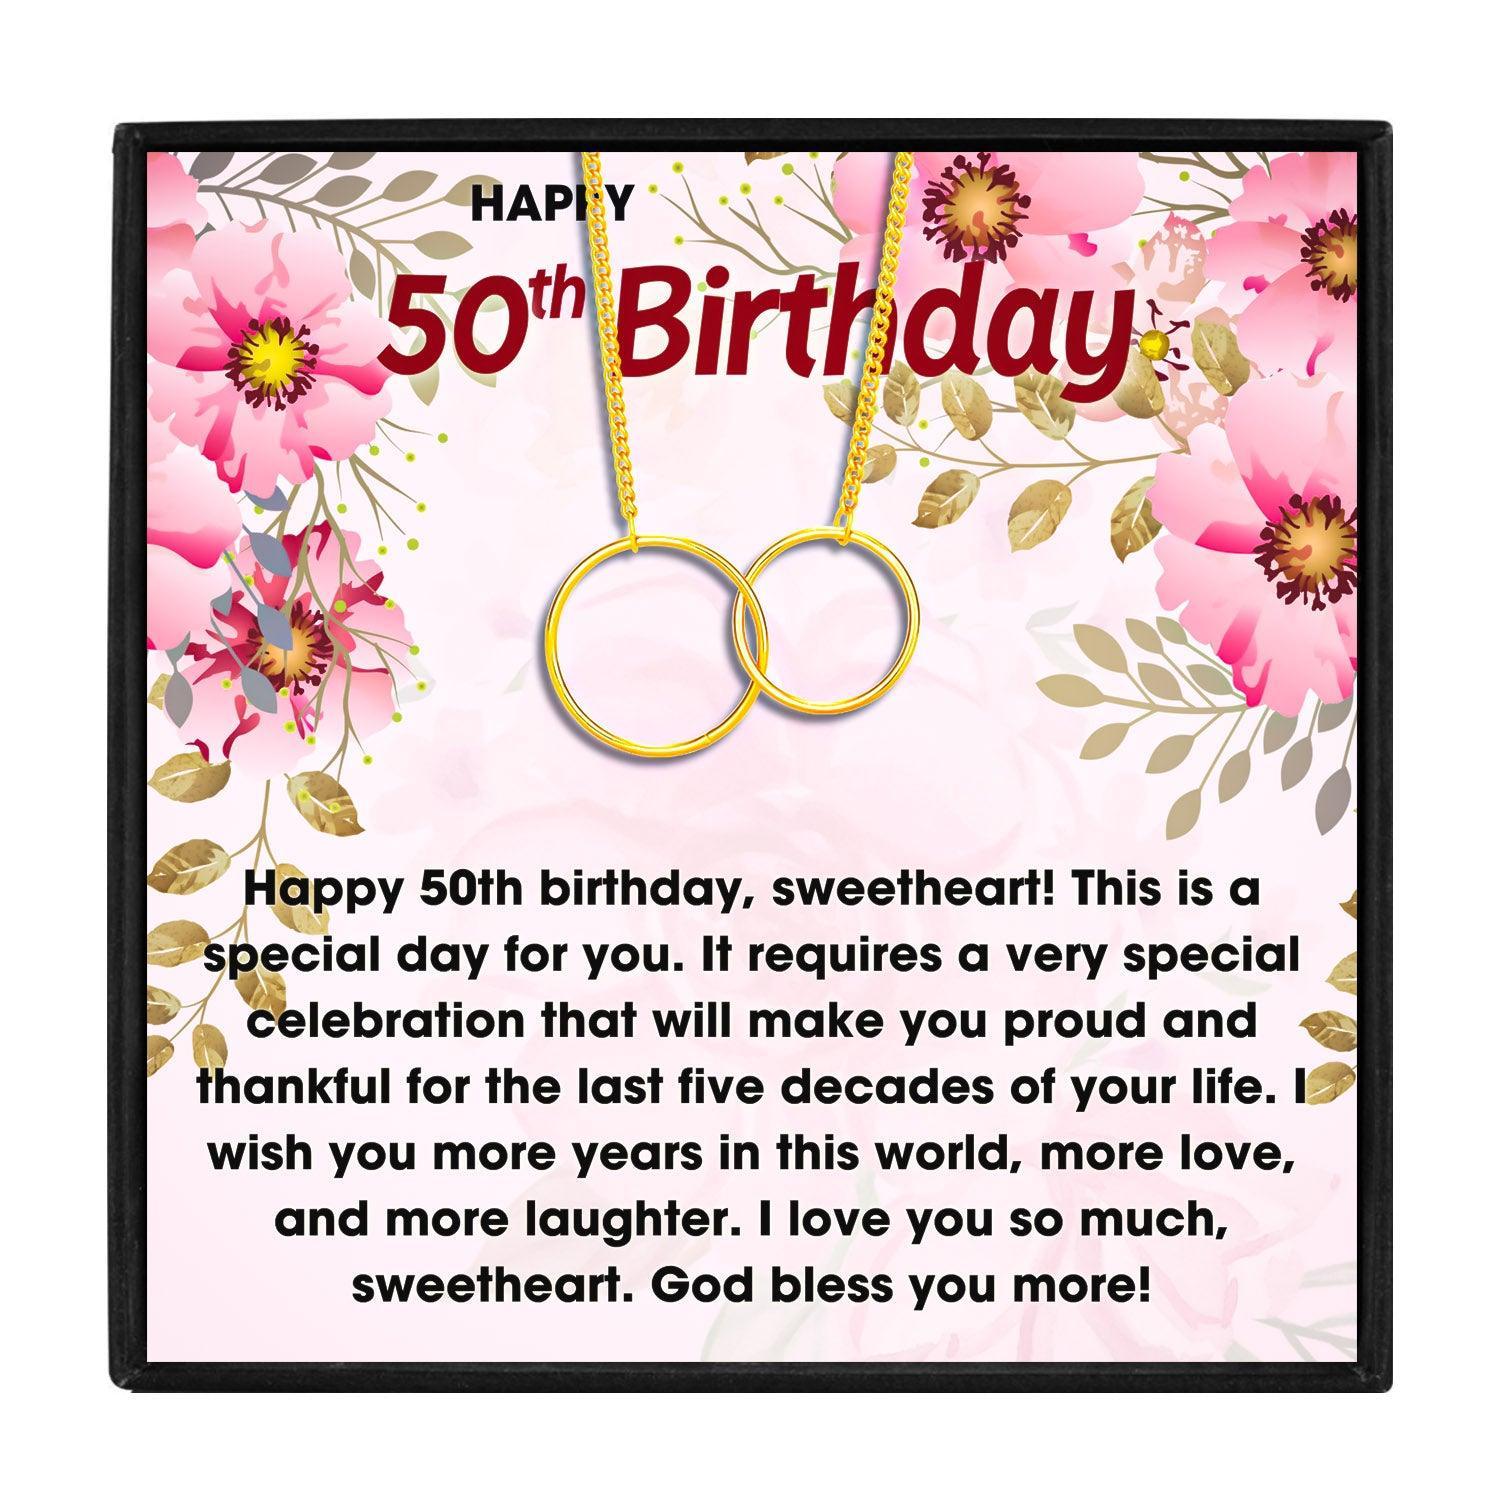 50th Birthday Gifts for Women that They'll Love in 2023 | 50th Birthday Gifts for Women that They'll Love - undefined | 50 birthday gift, 50th Birthday Gifts For Women, 50th birthday ideas for women, 50th birthday unique gifts, gifts for 50th birthday woman | From Hunny Life | hunnylife.com